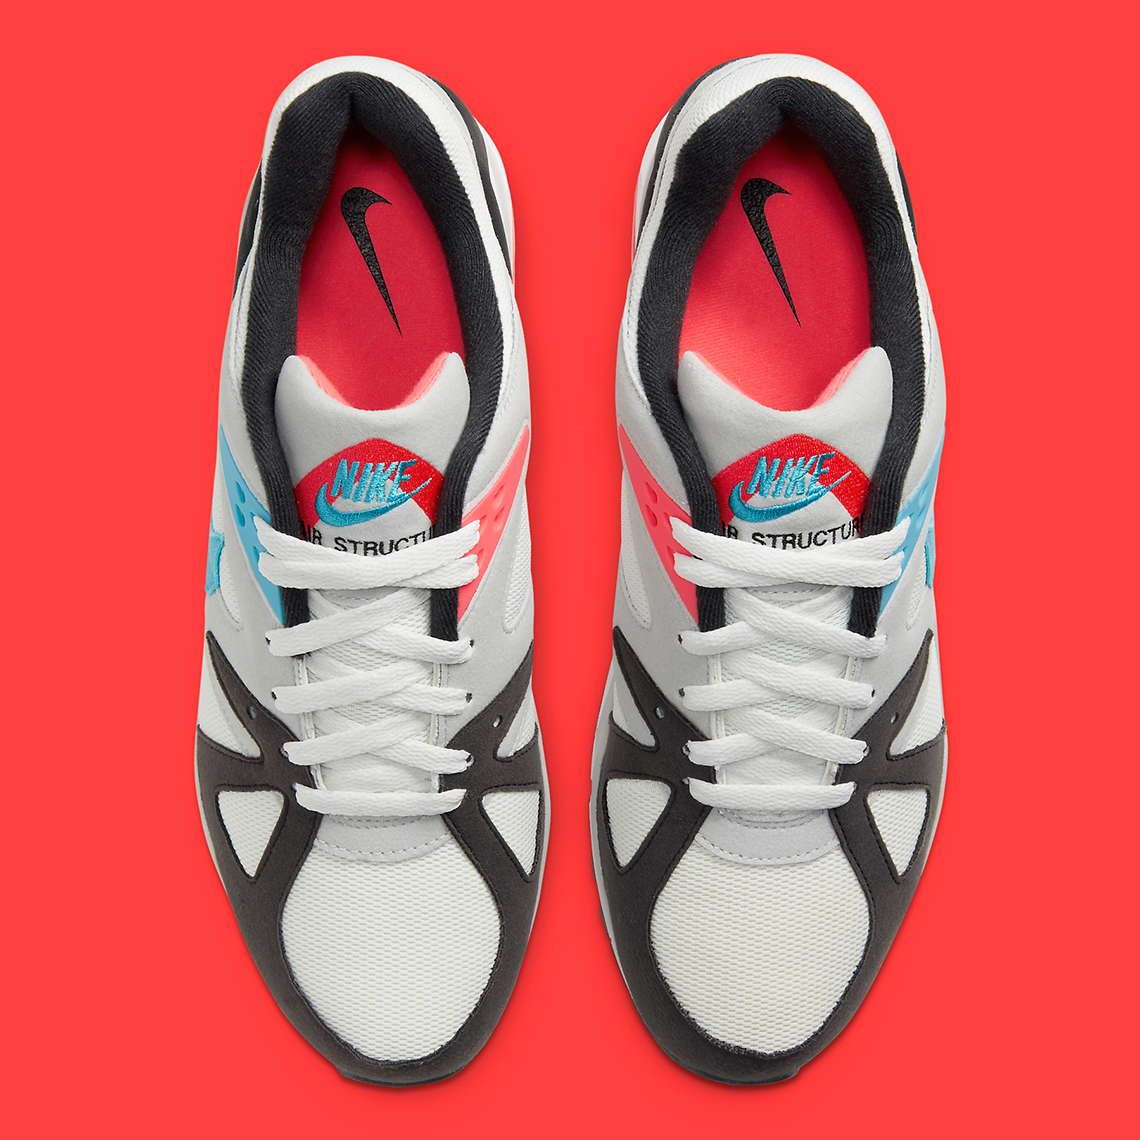 Nike Air Structure Triax 91 Og White Neo Teal Black Infrared Nike Air Structure Triax 91 Og White Neo Teal Black Infrared Cv3492 100 2